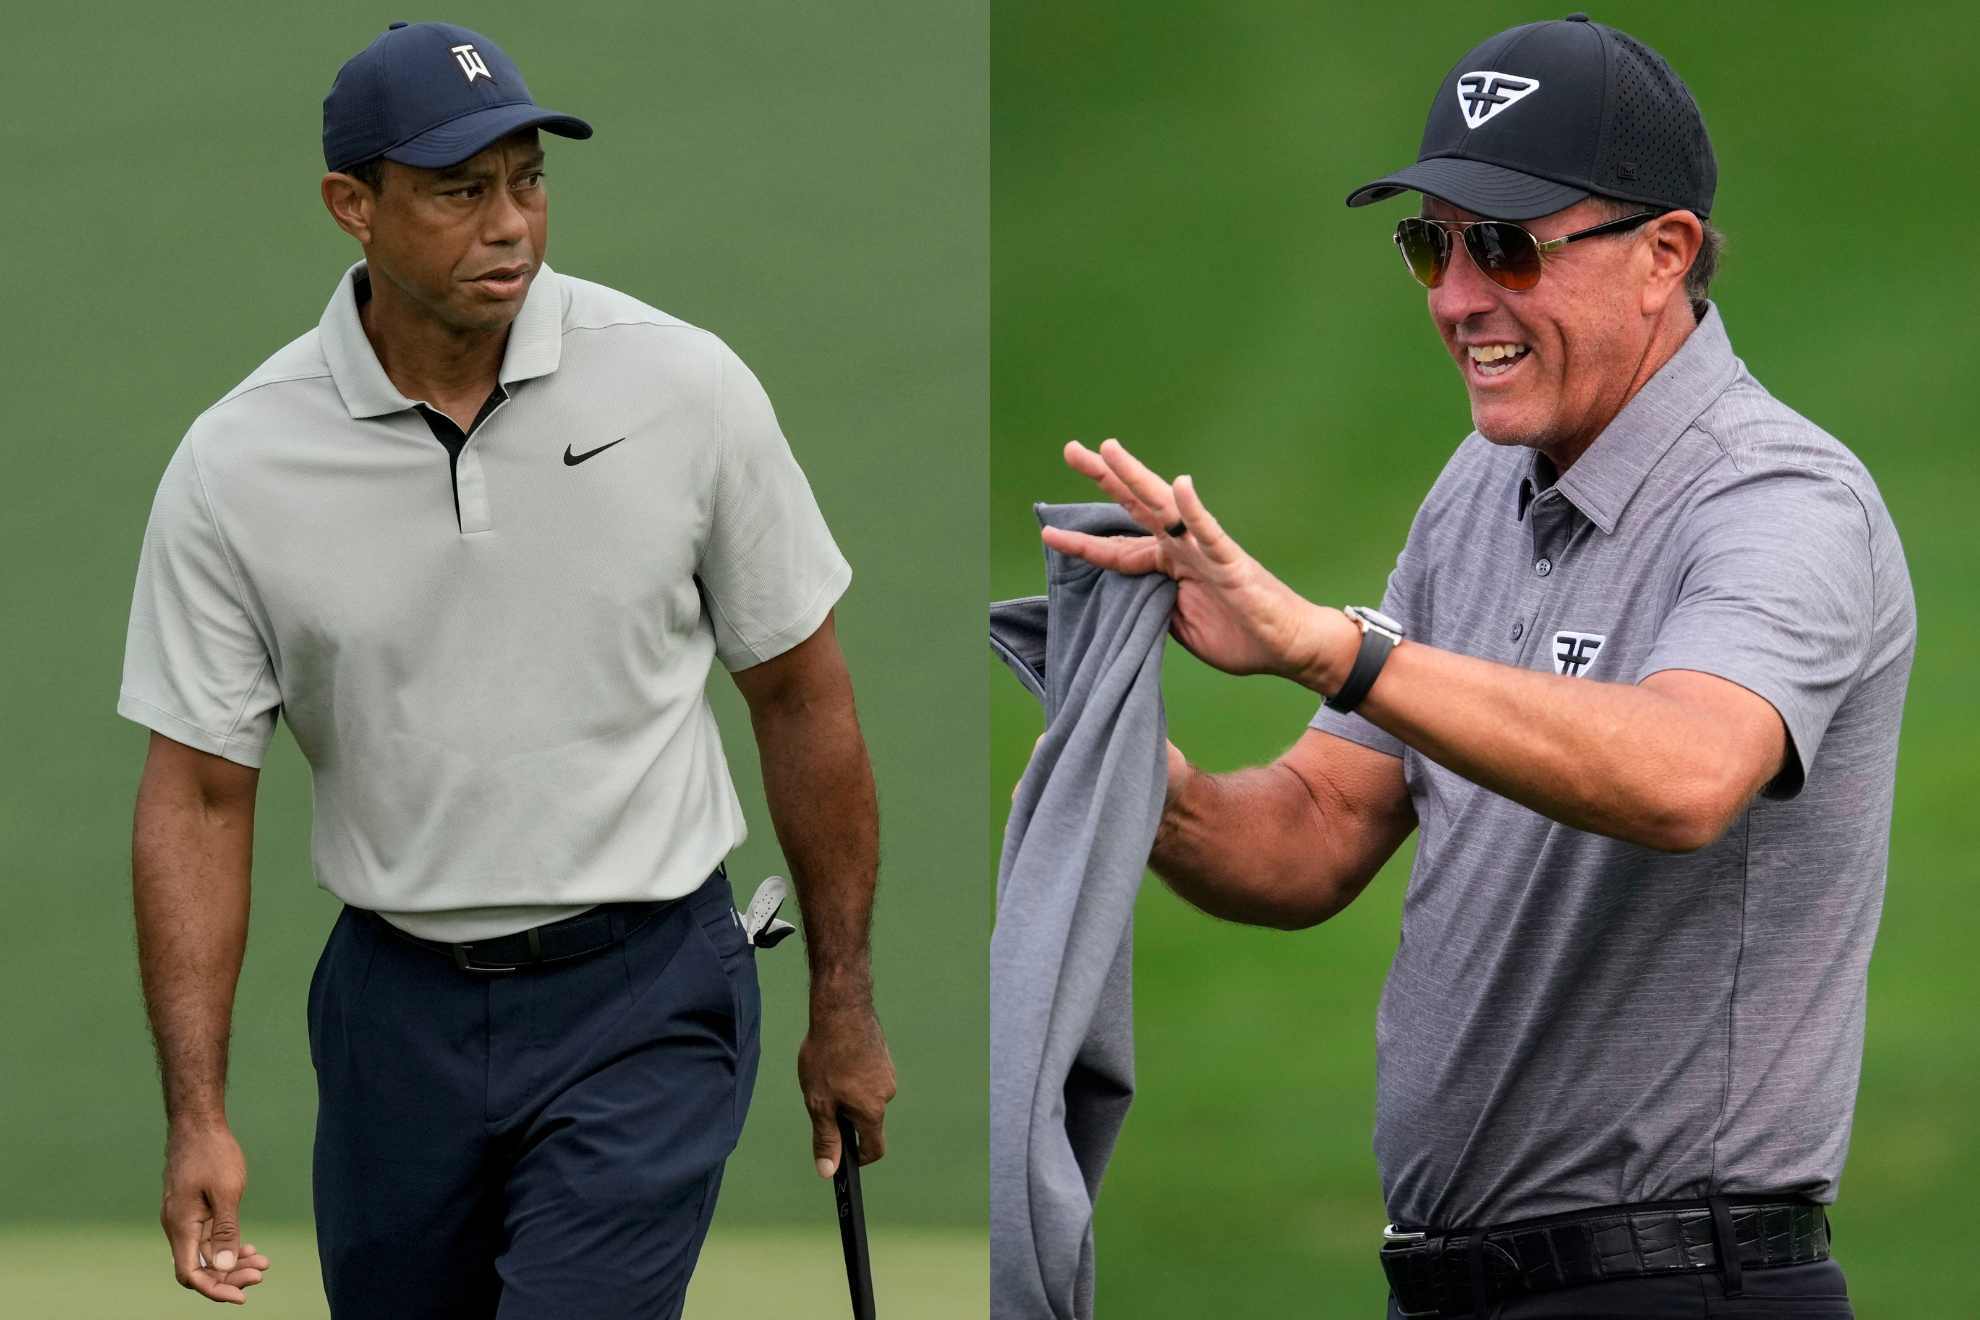 Tiger Woods (left) and Phil Mickelson (right), practice at Augusta ahead of the 2023 Masters.